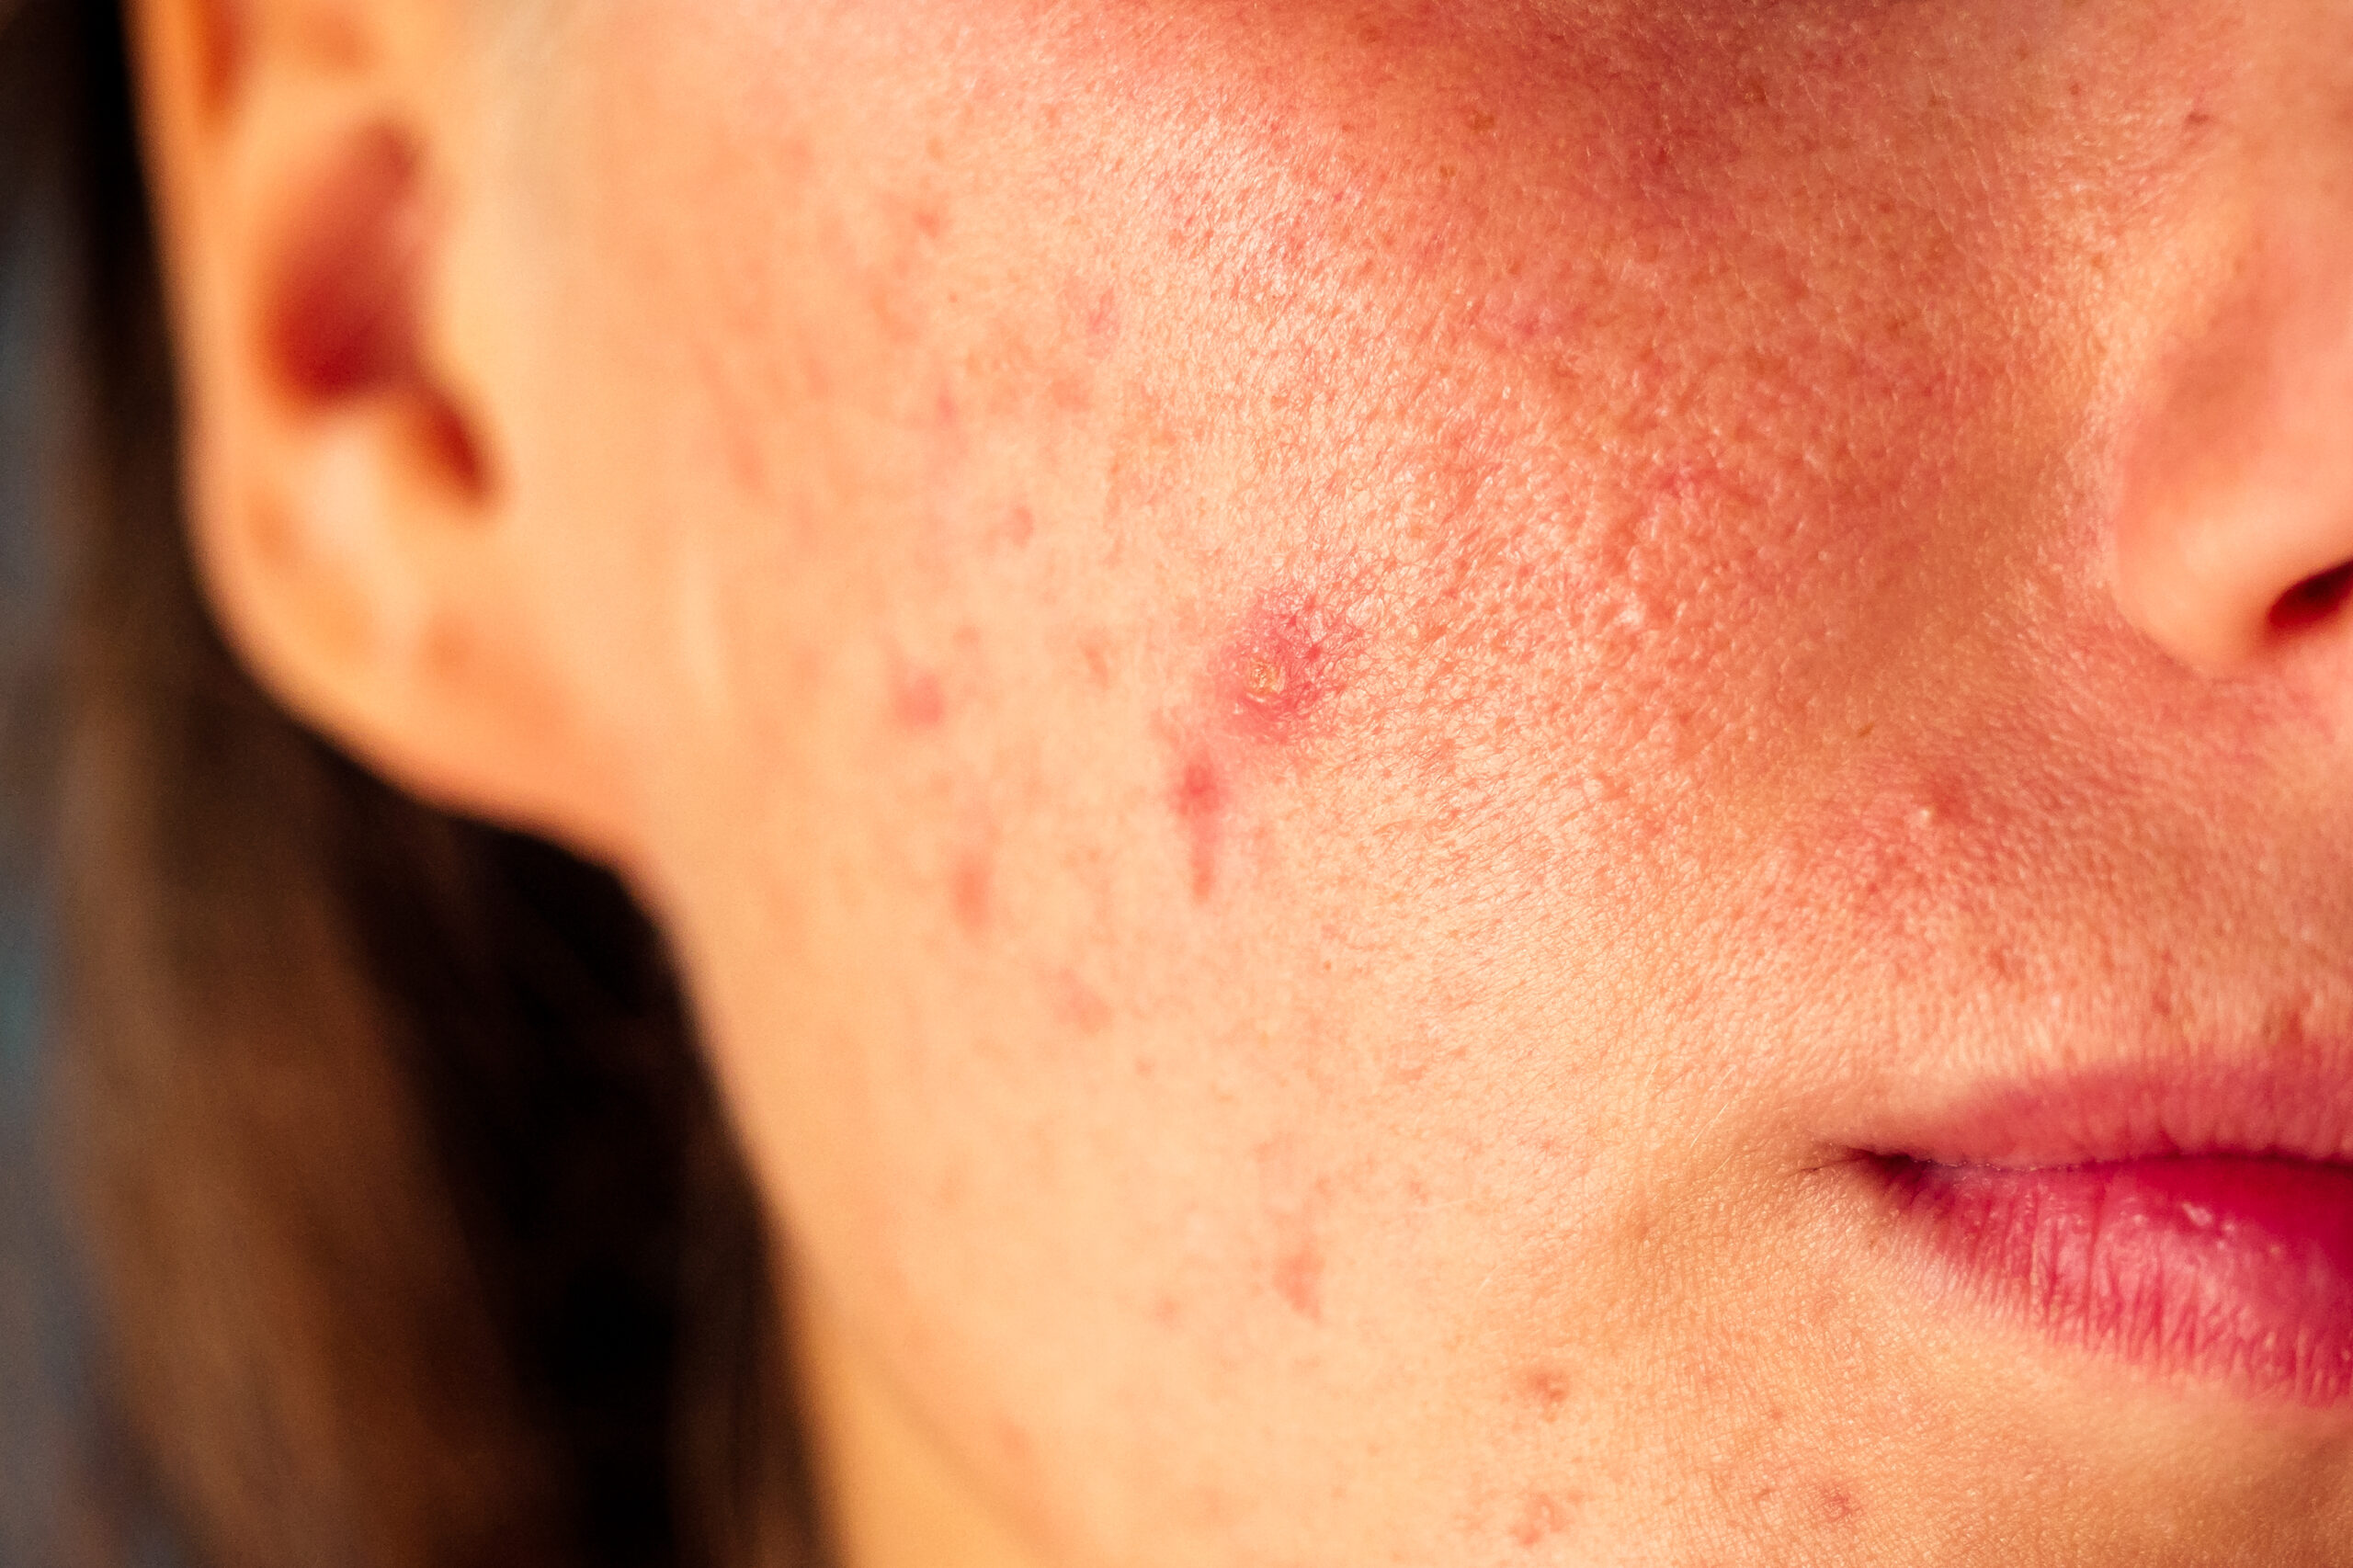 Post-acne,,Scars,And,Red,Festering,Pimples,On,The,Face,Of